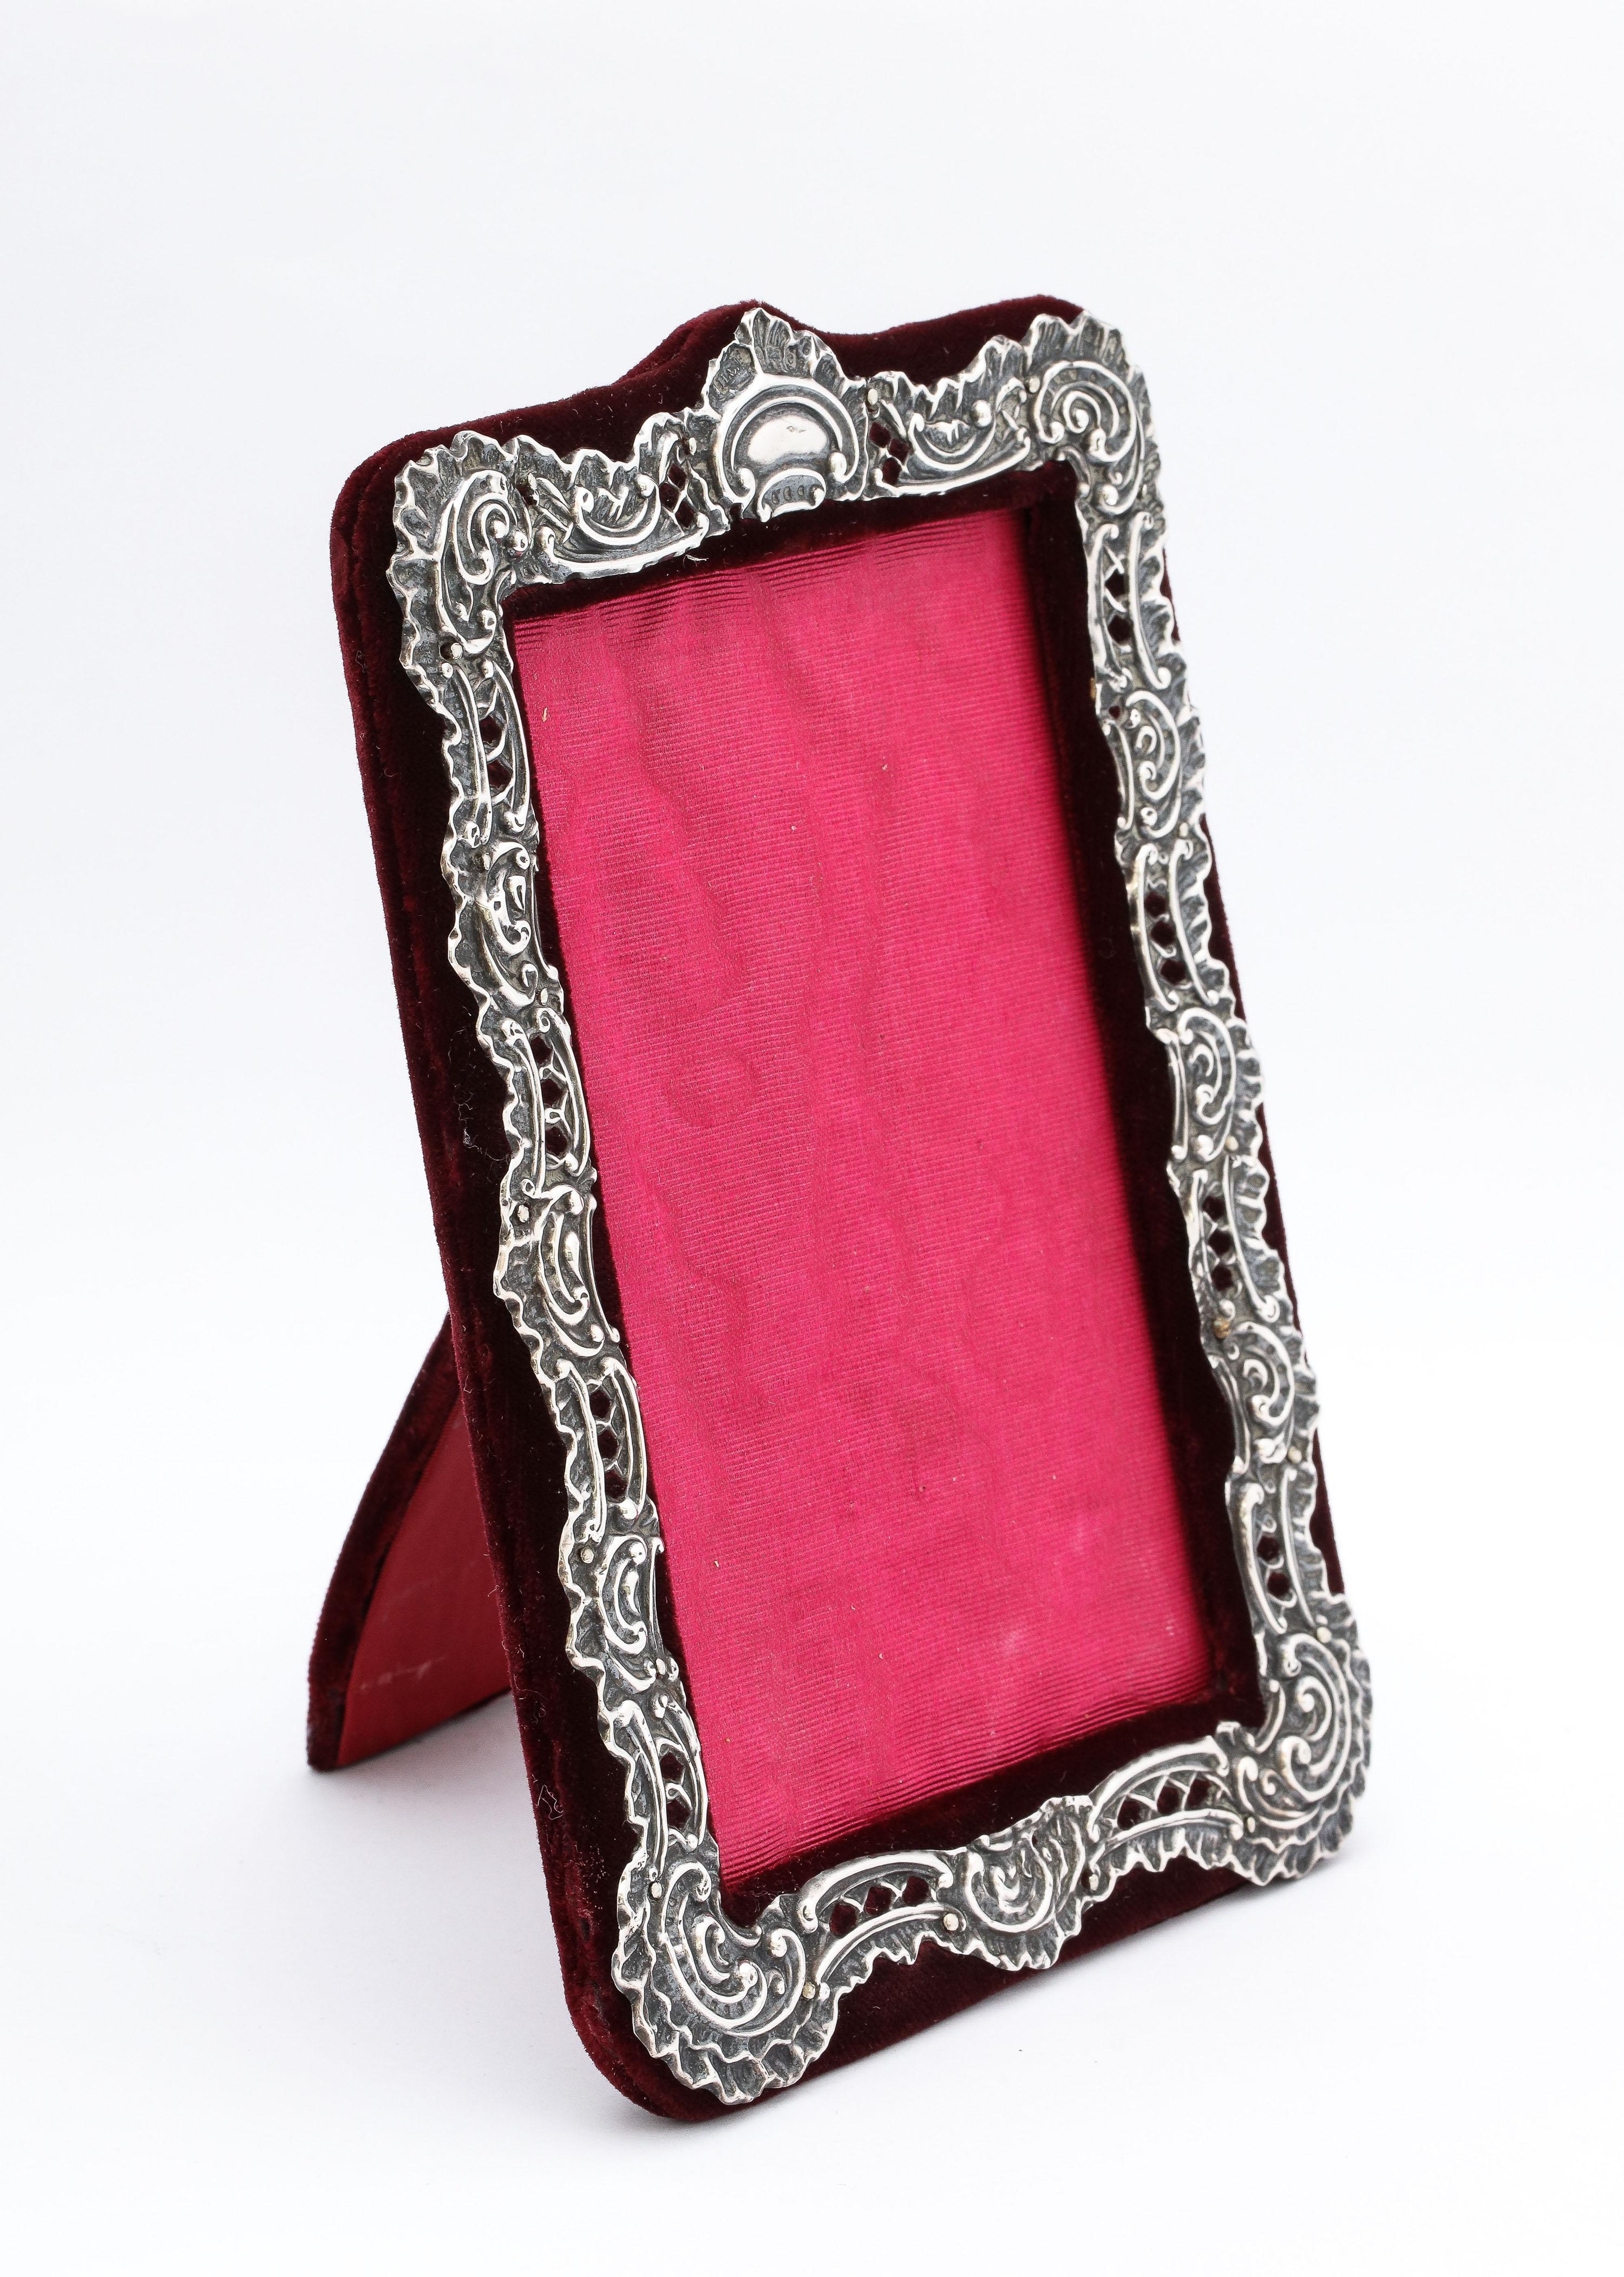 Edwardian Period Victorian Style Sterling Silver Picture Frame In Good Condition For Sale In New York, NY